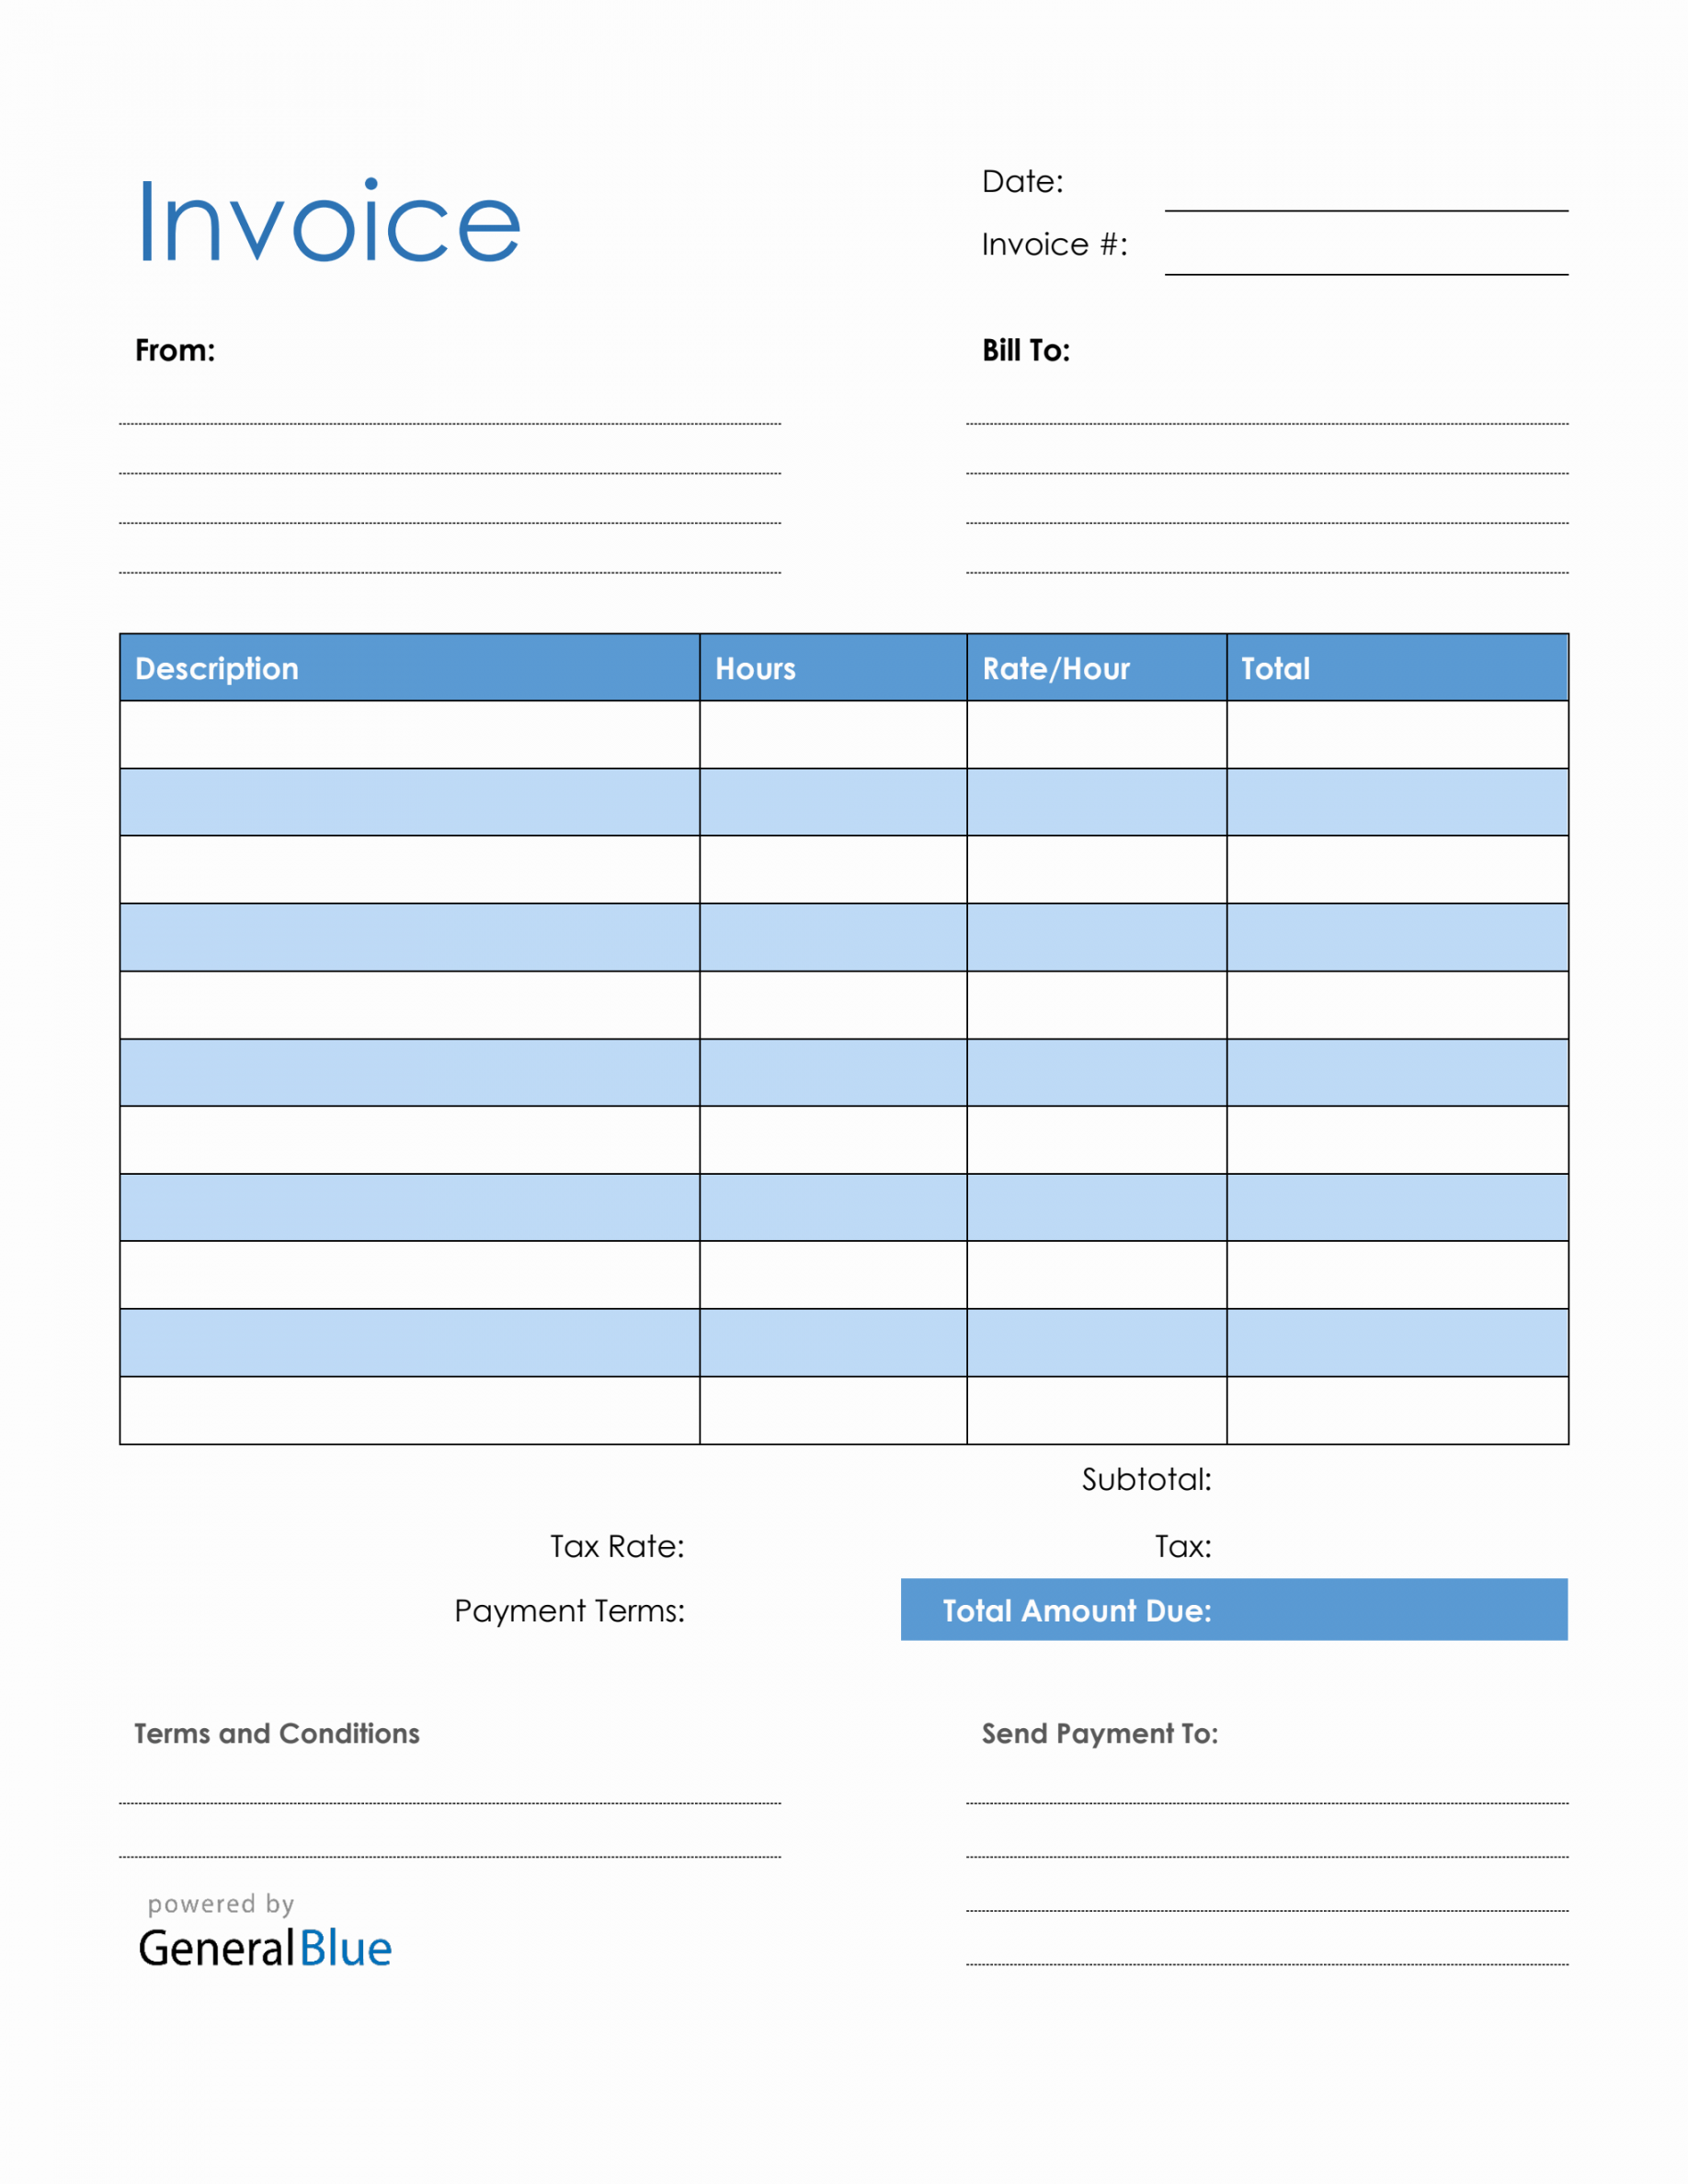 Free Invoice Template Printable - Printable - Blank Invoice Template in PDF Blue